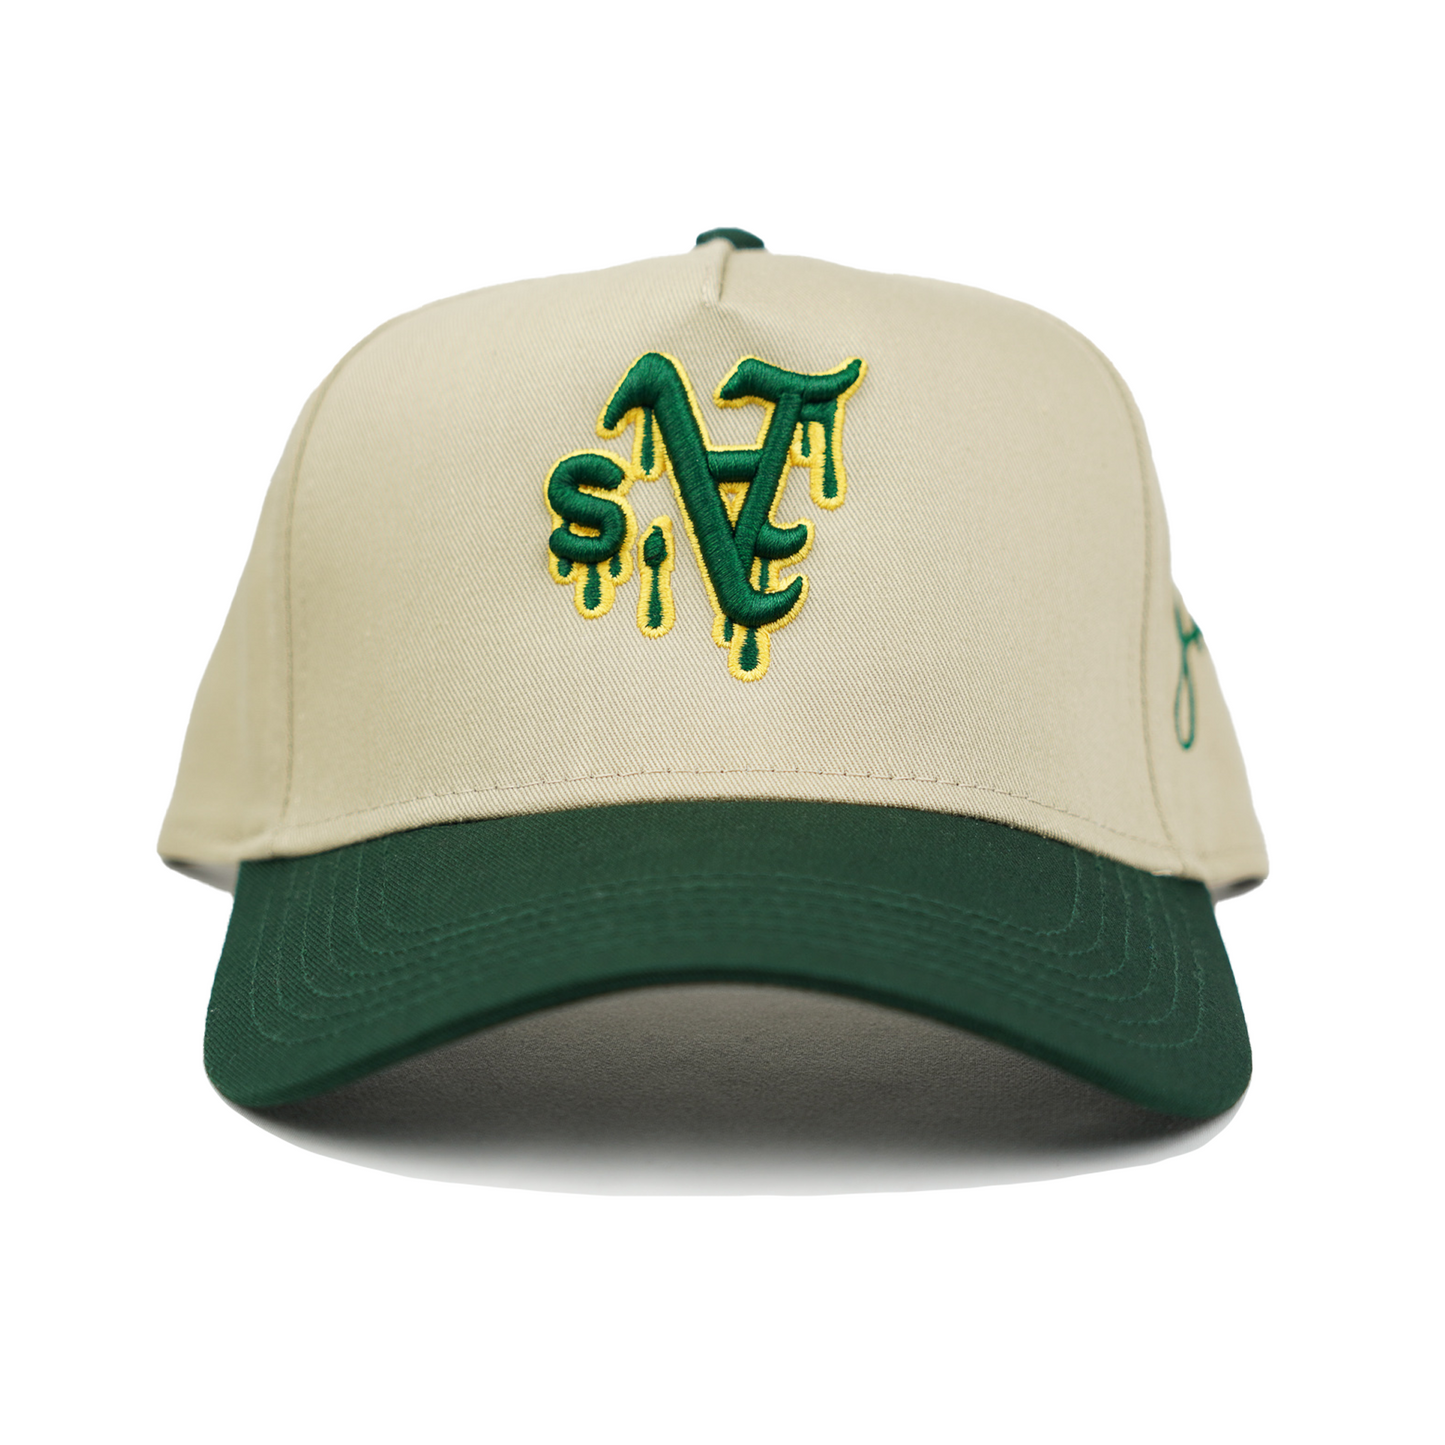 A Dripping Snapback Hat (KHAKI/FOREST GREEN)